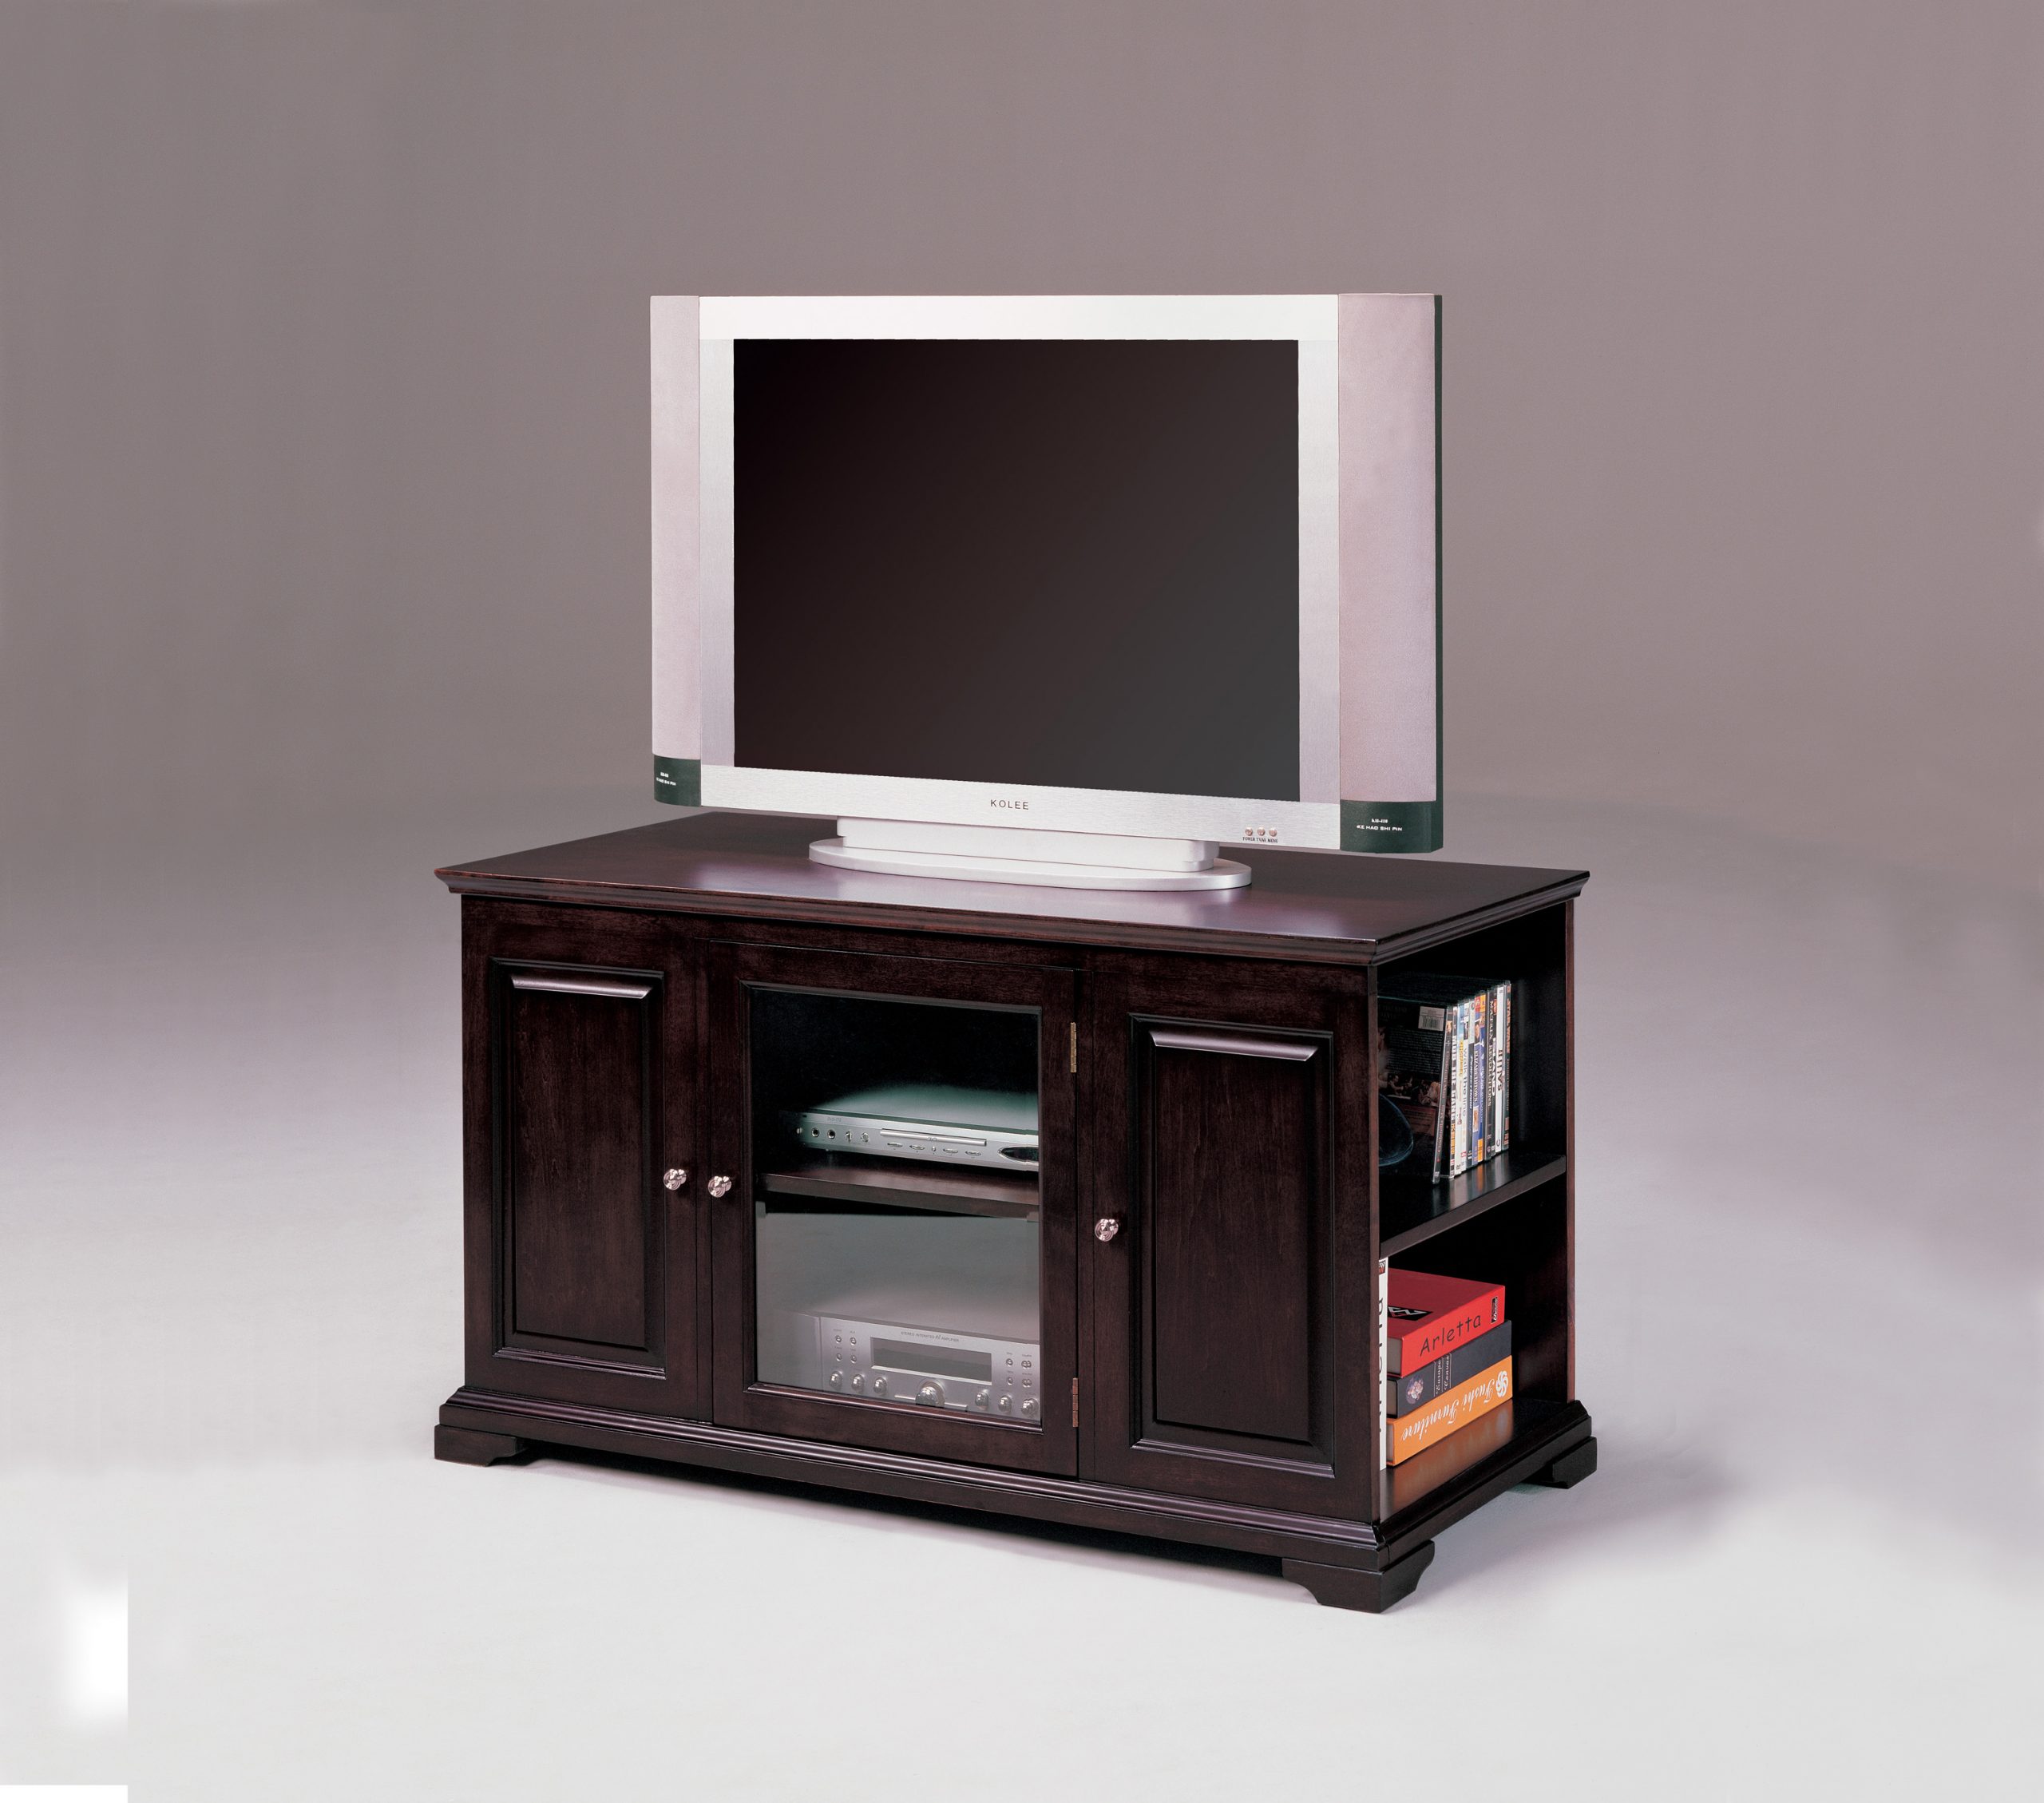 48″ WOODEN TV STAND